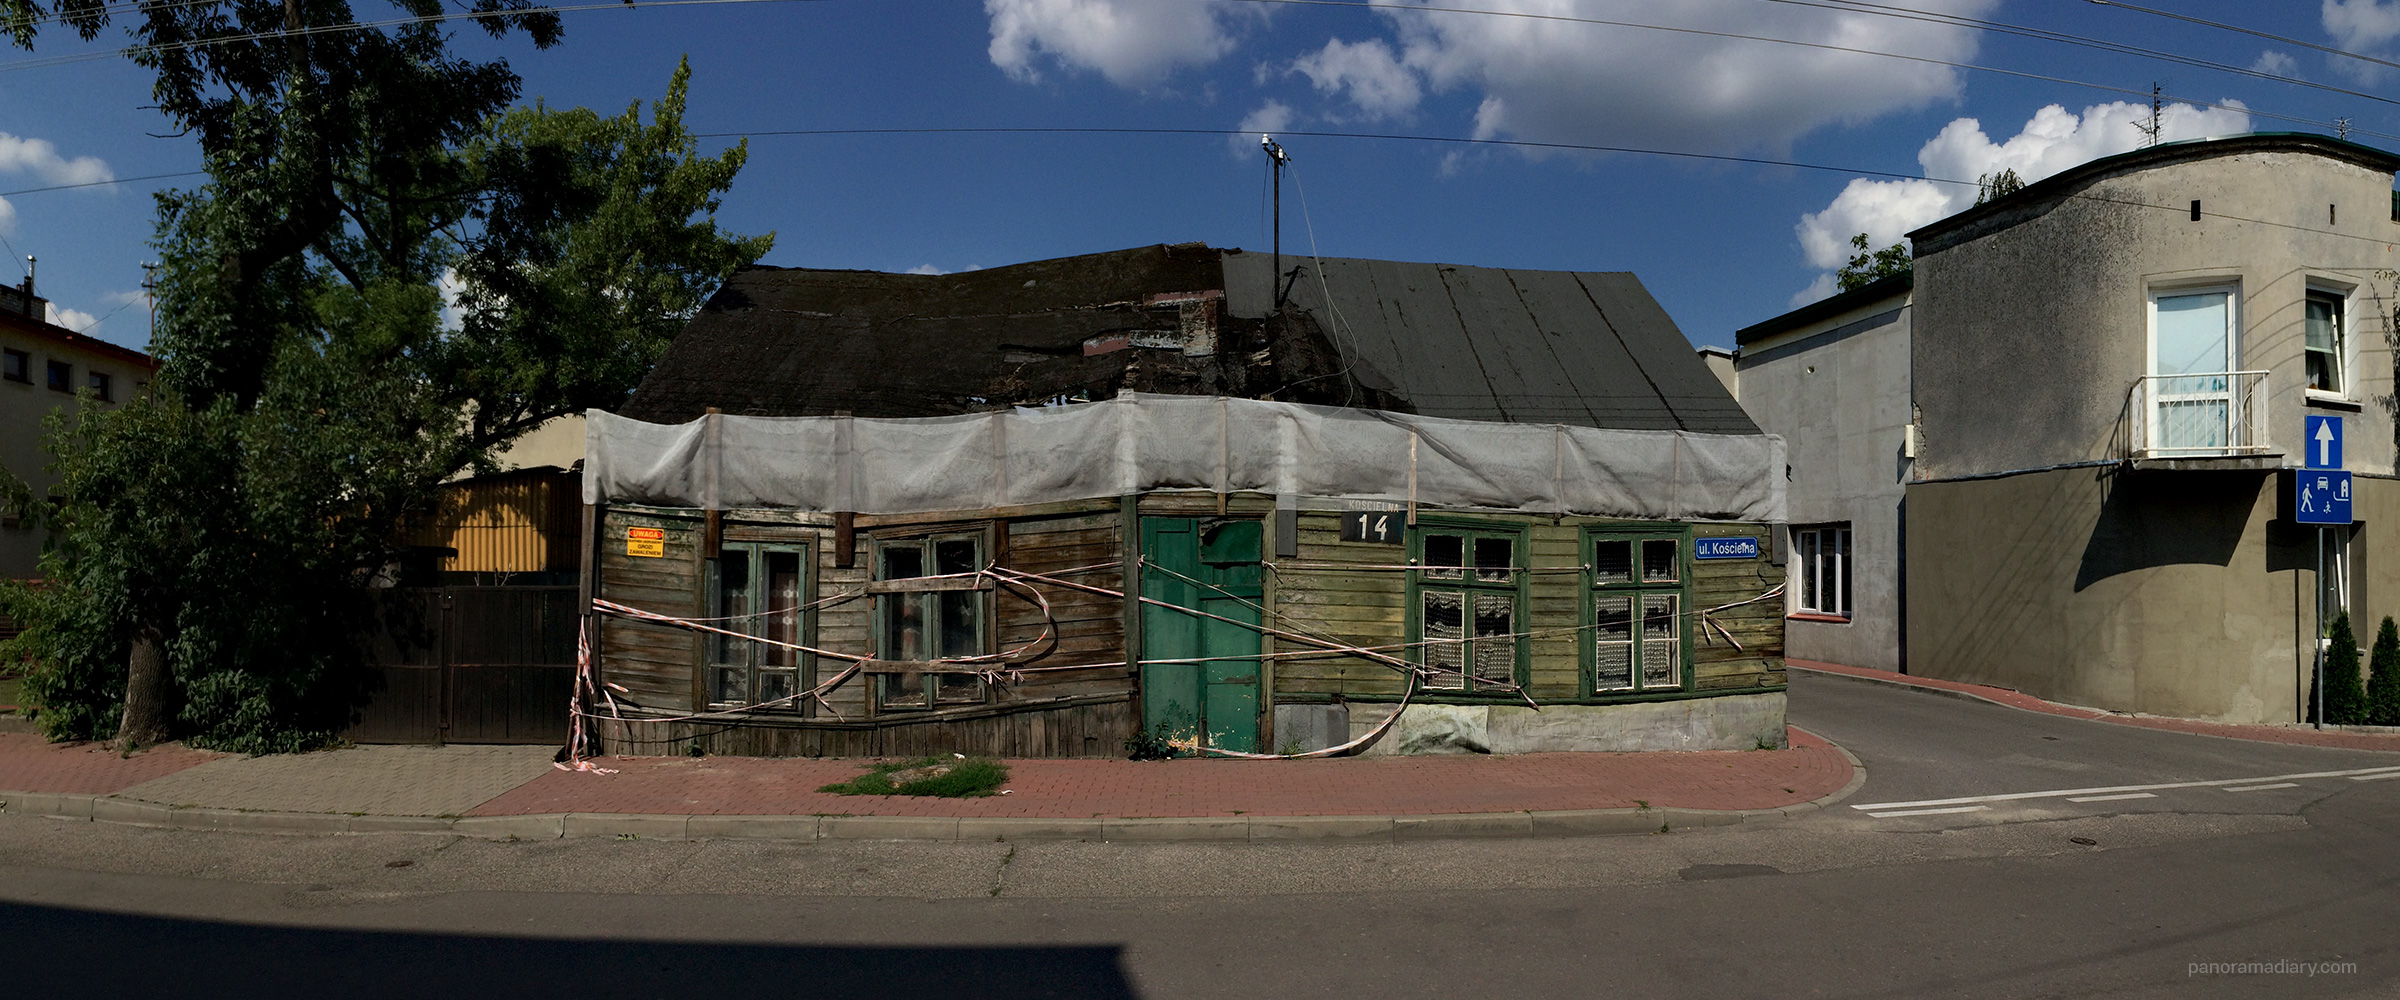 Old bent house in Karczew | PANORAMA DIARY